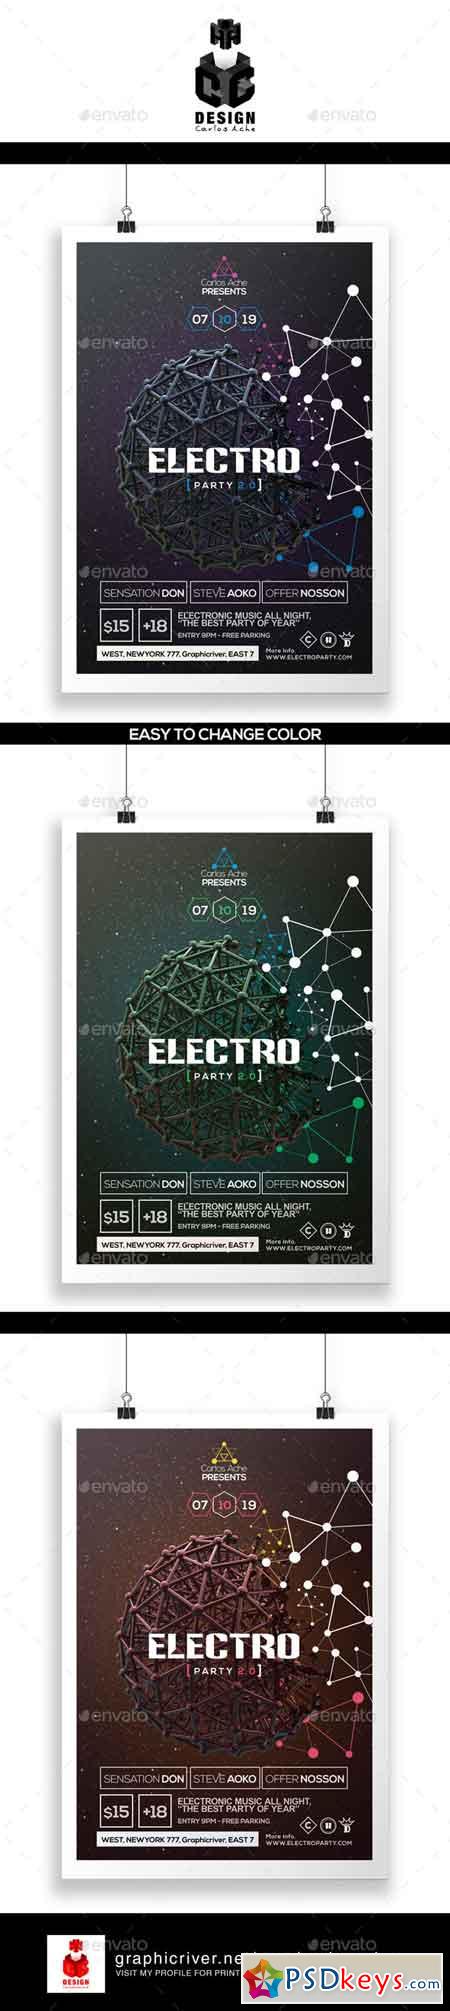 Electro Party Flyer & Poster Template 12319036